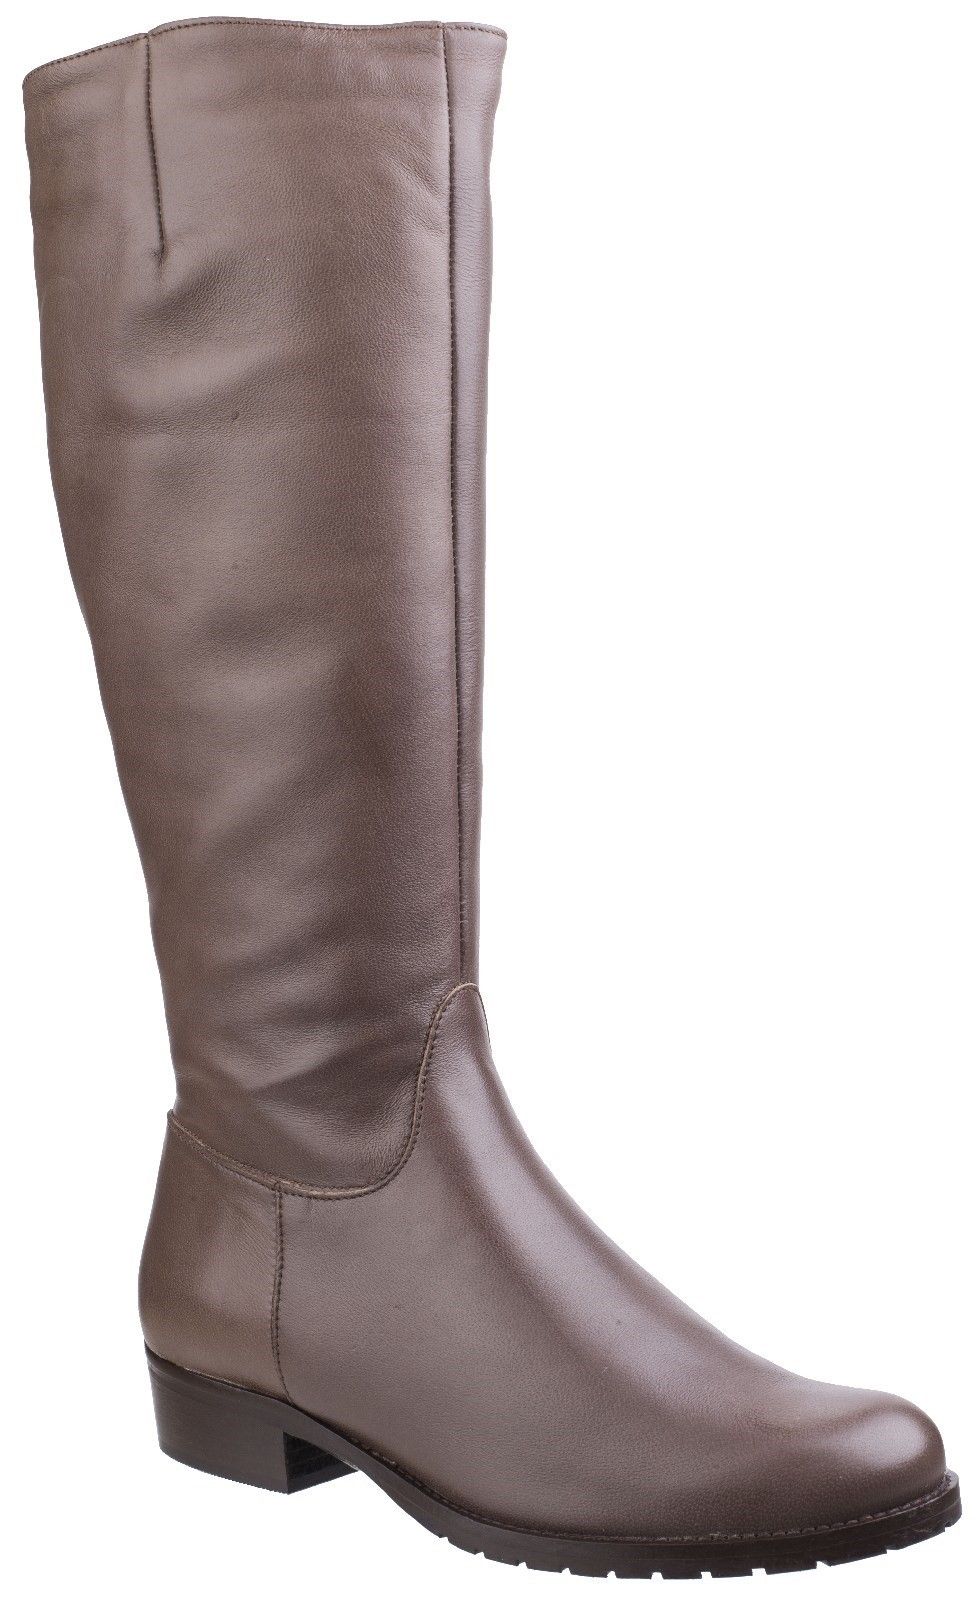 Ladies semi-formal day to night tall boot crafted with a luxury leather upper, side zip and low block heel. Crafted with a smooth full grain leather upper. 
Full inside zip. 
Soft fleece warm lining. 
Shaped heel stiffener and contoured fitted back. 
Hidden elasticated calf panel offers additional fitting.